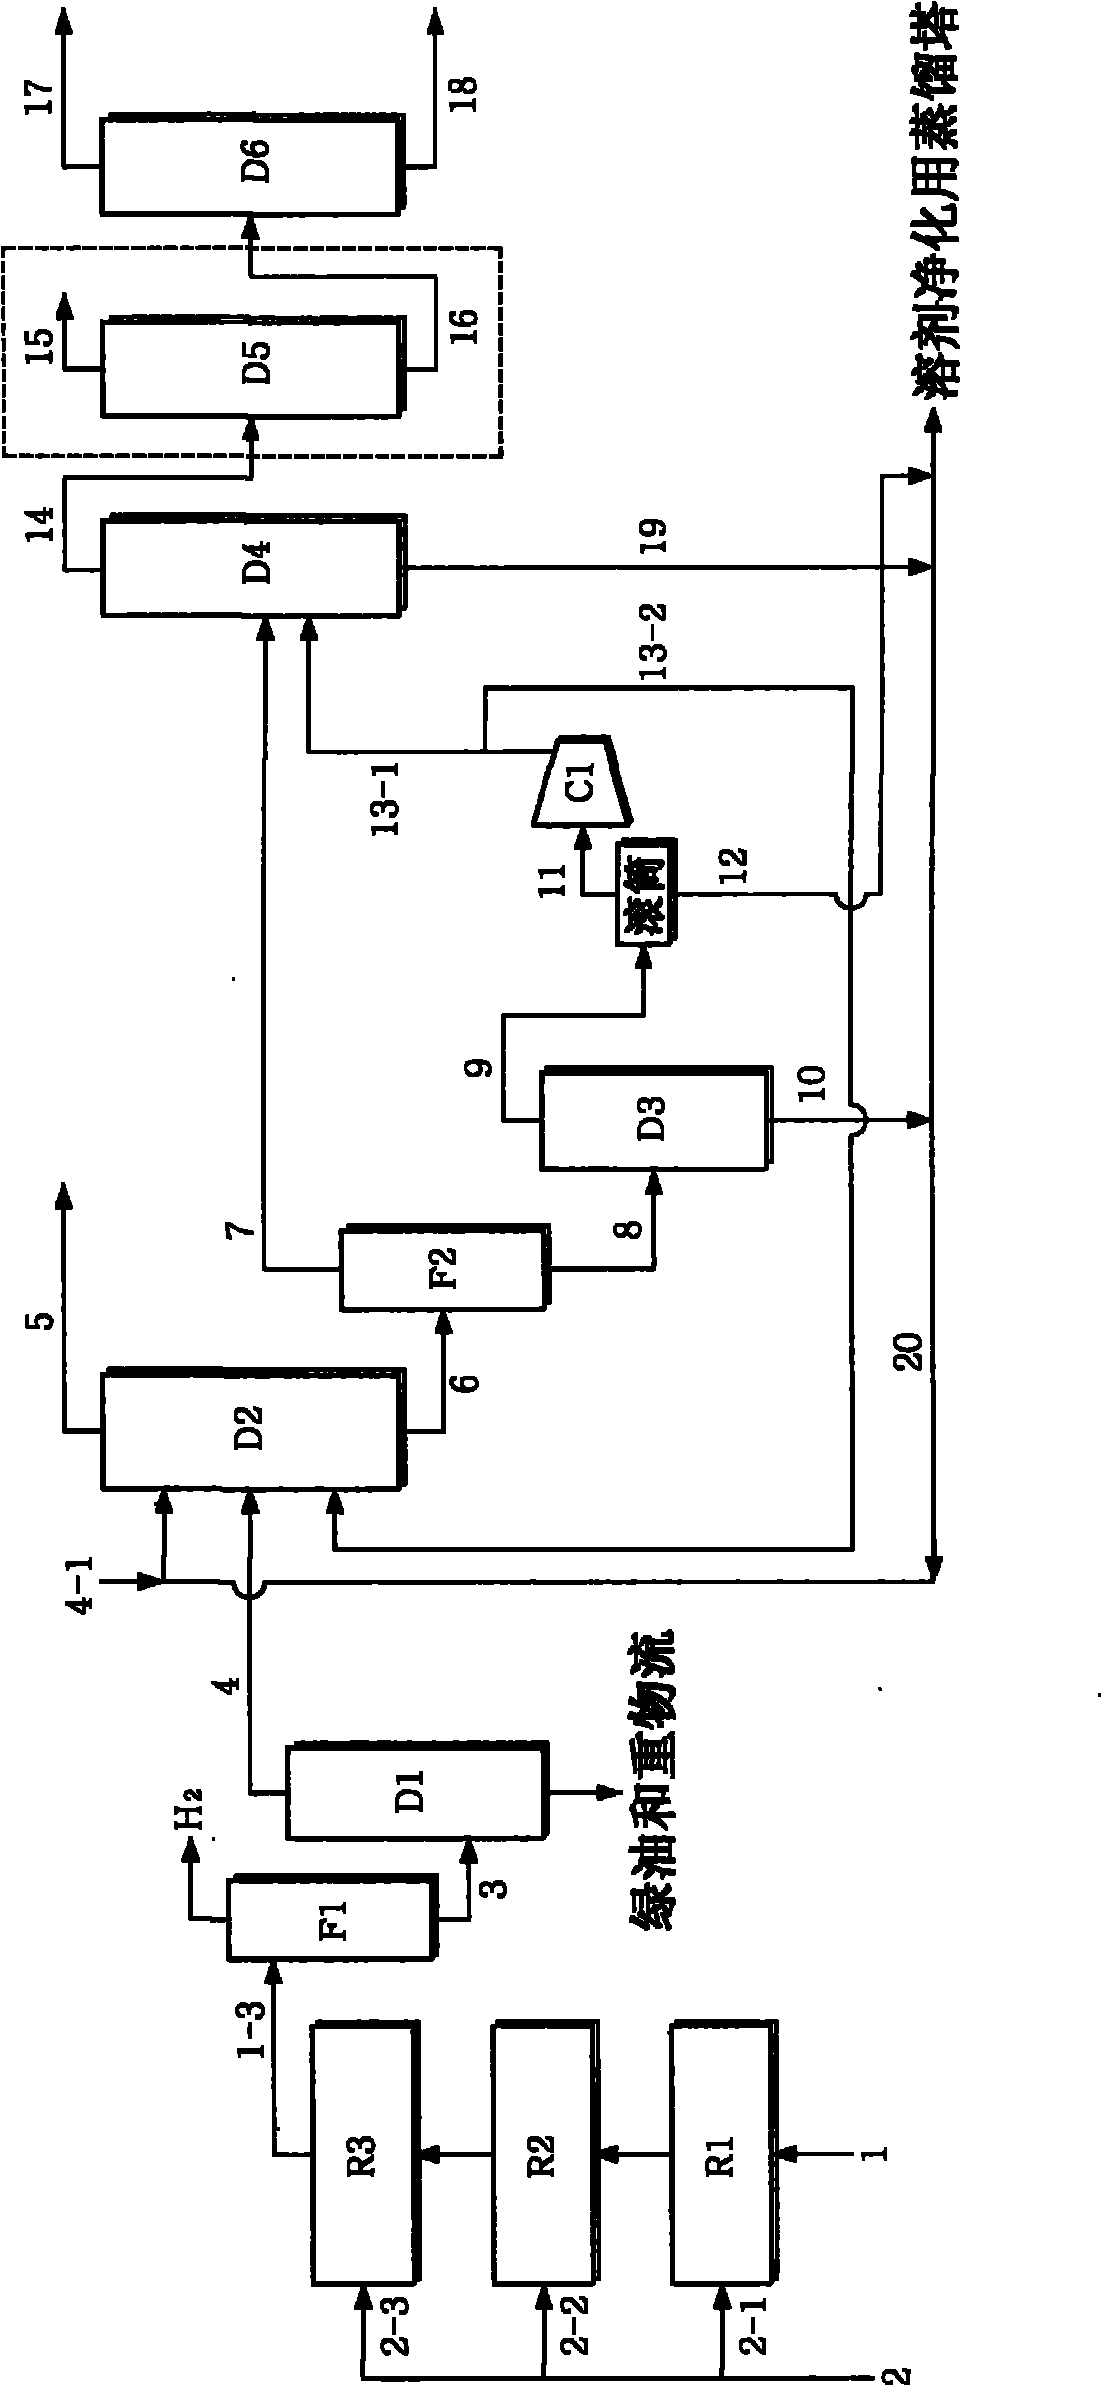 Process for 1,3-butadiene separation from crude C4 stream with acetylene converter